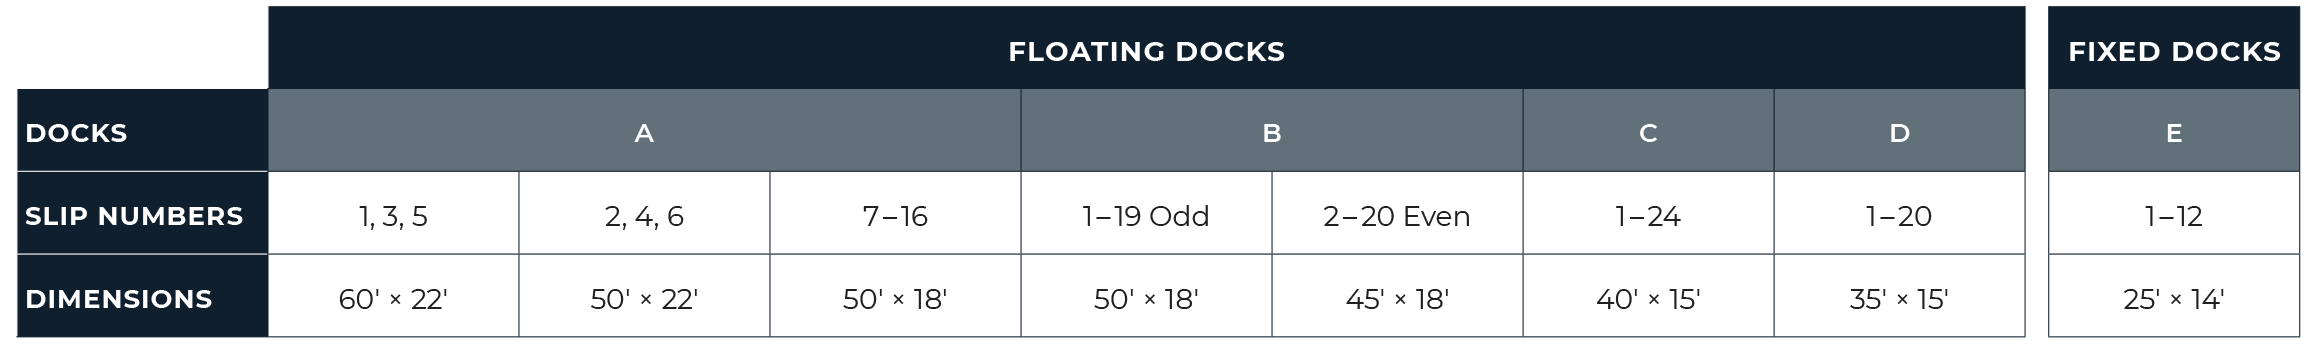 Dock Size Table